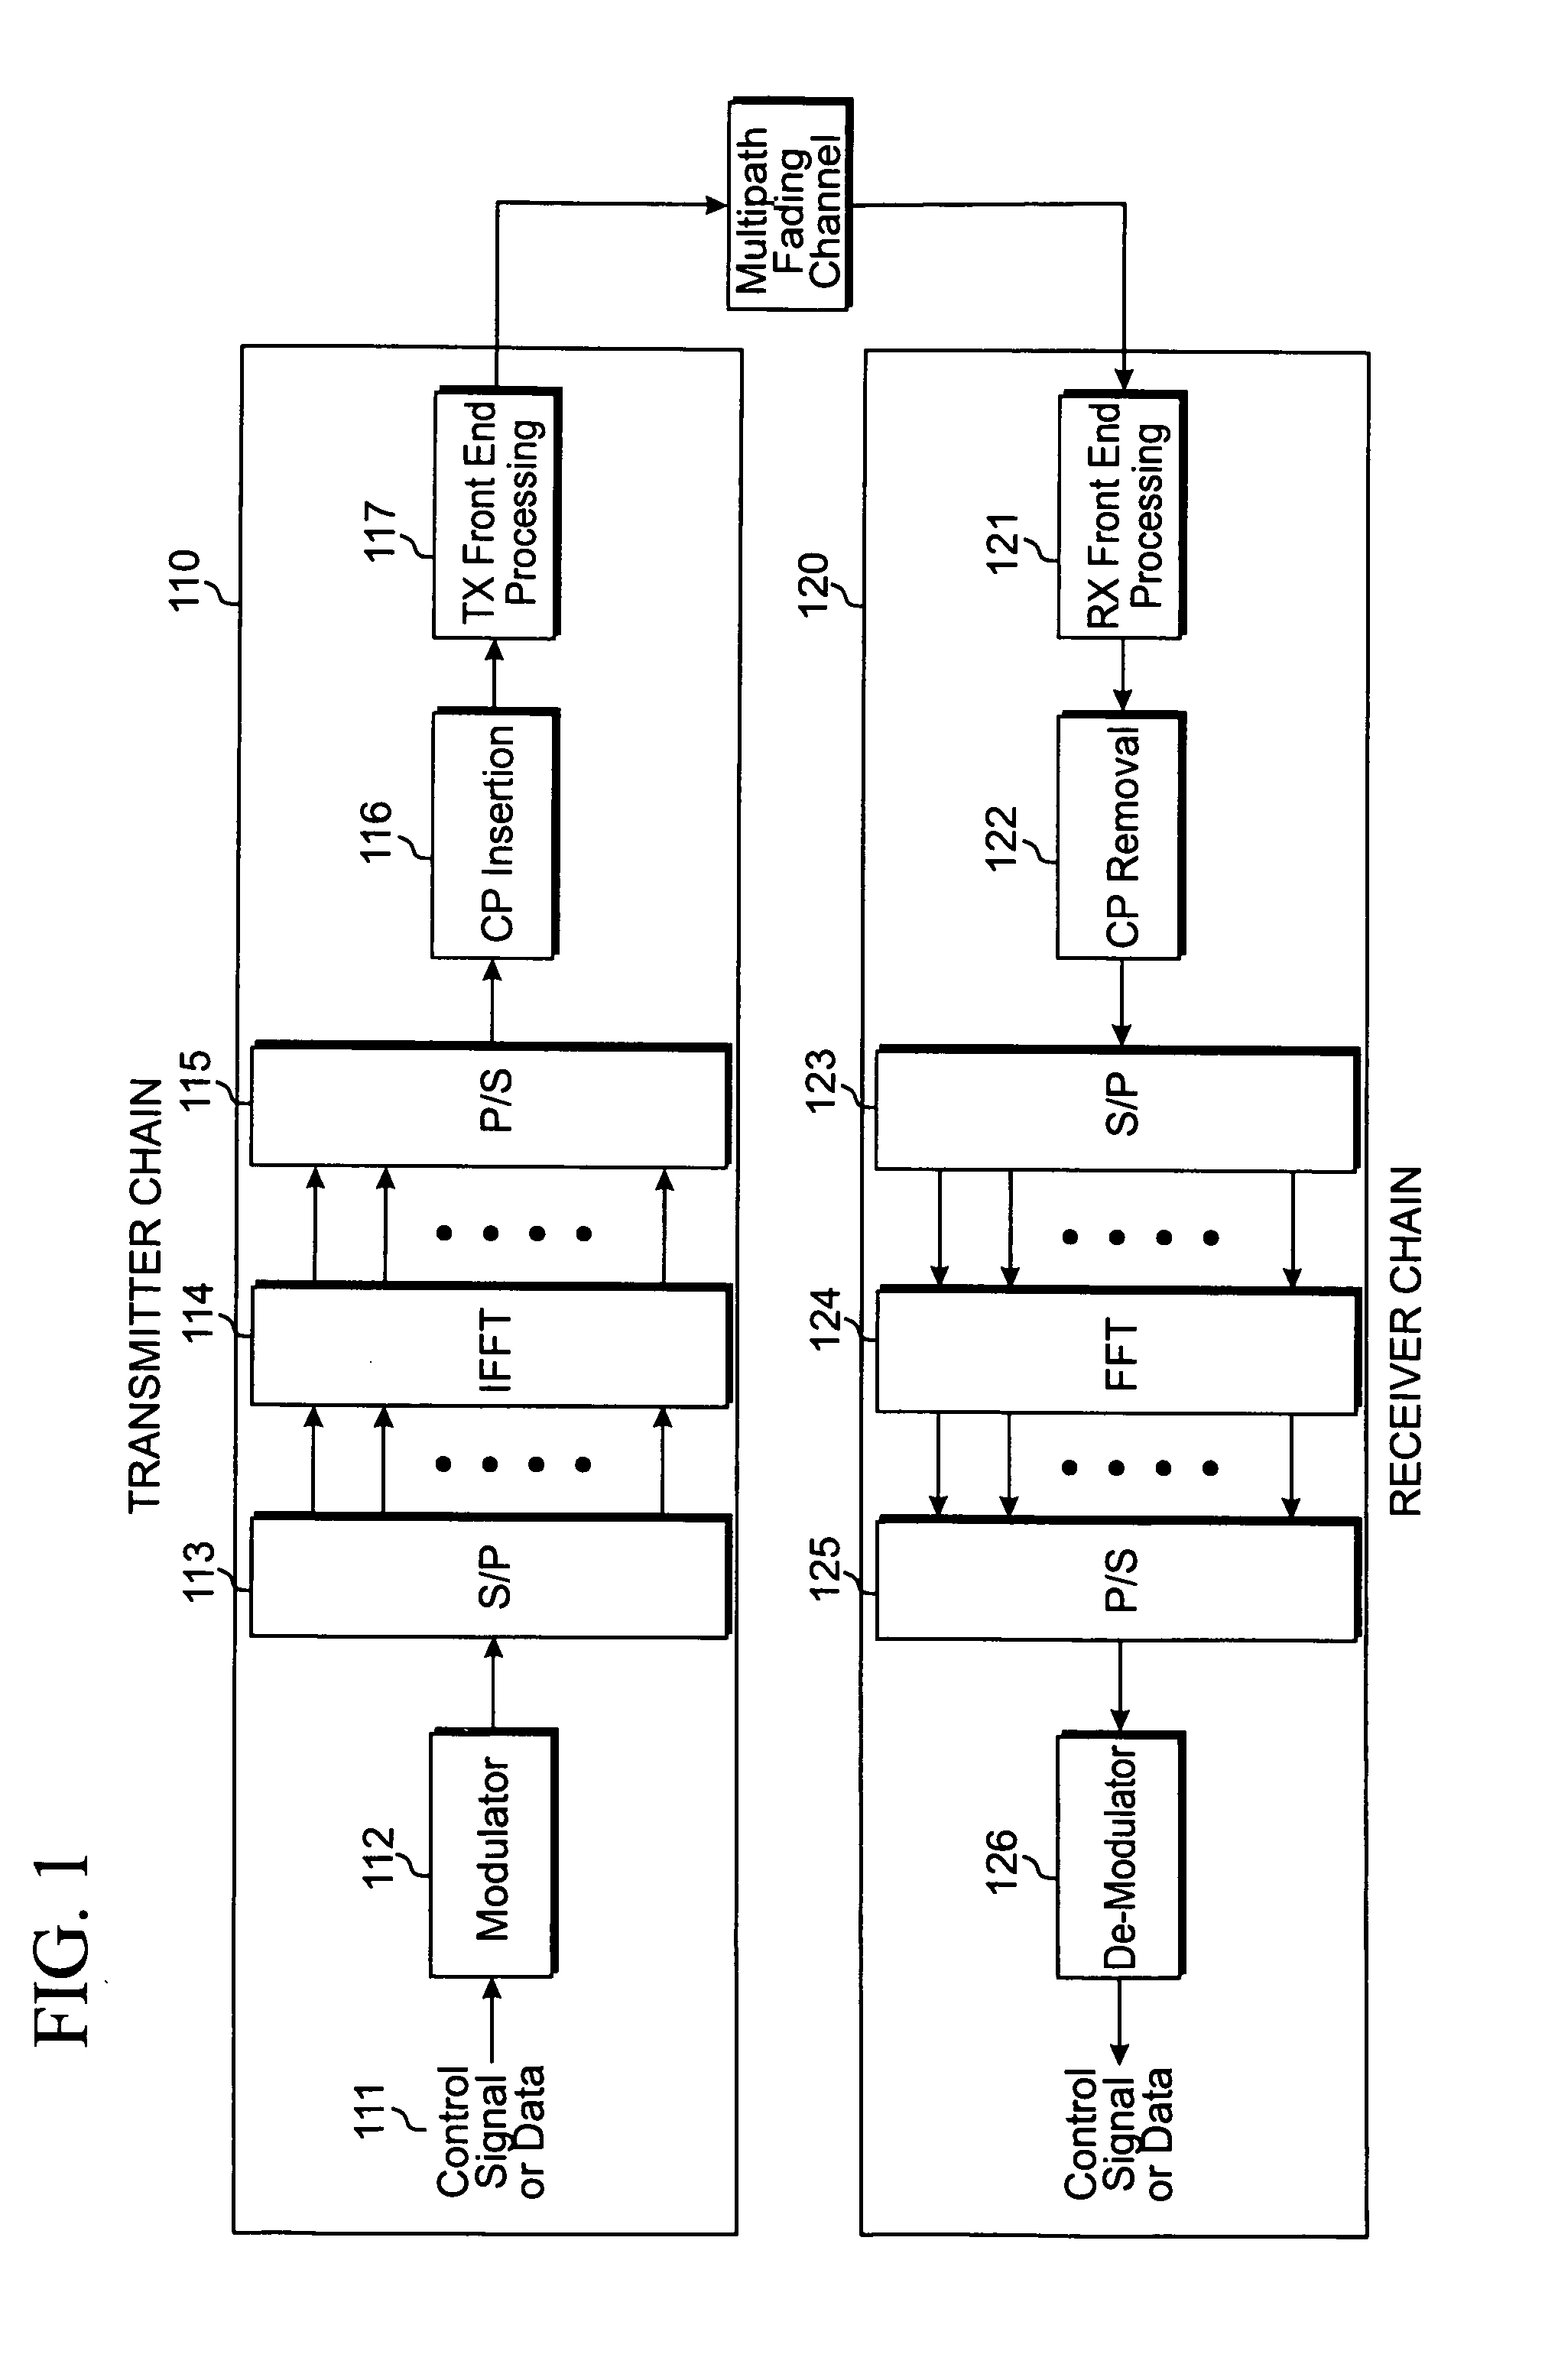 Simple MIMO precoding codebook design for a MIMO wireless communications system